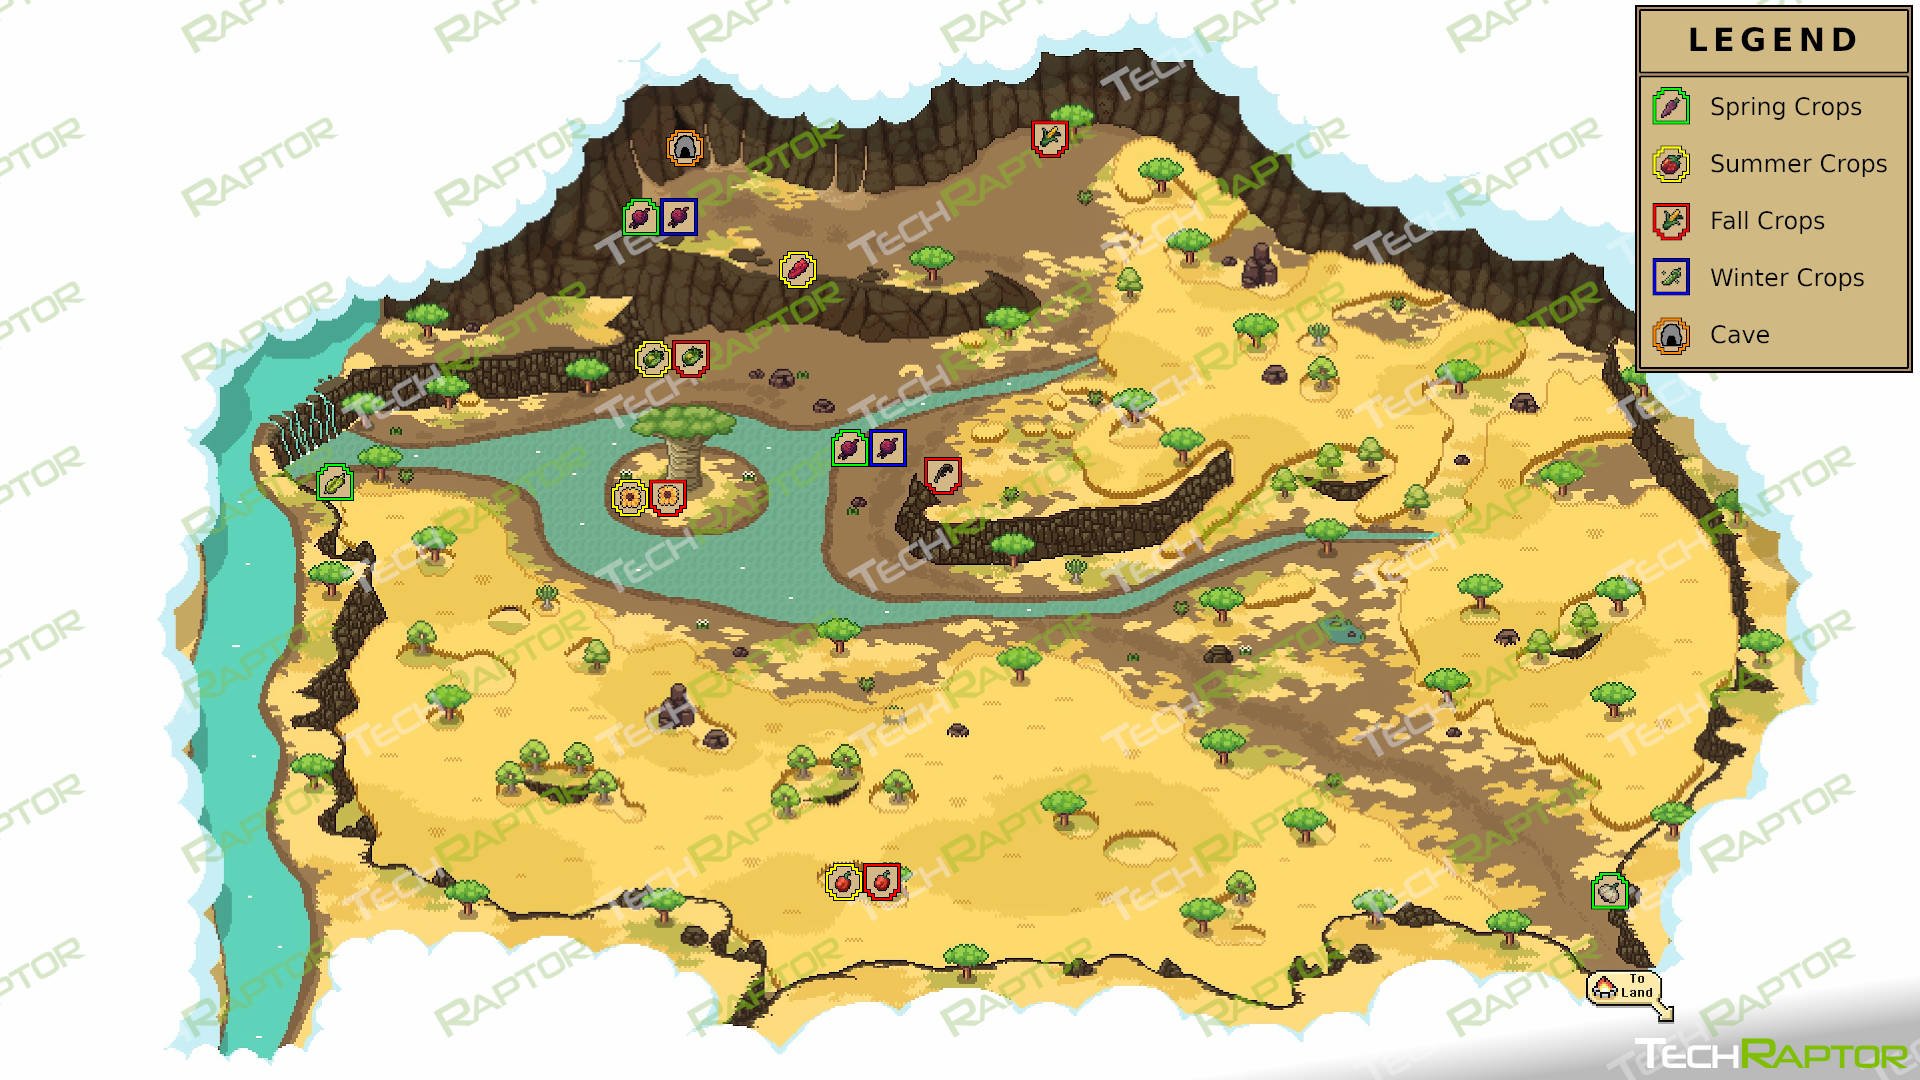 Roots of Pacha Map and Locations Guide - Savanna Map with Seed Icons 2